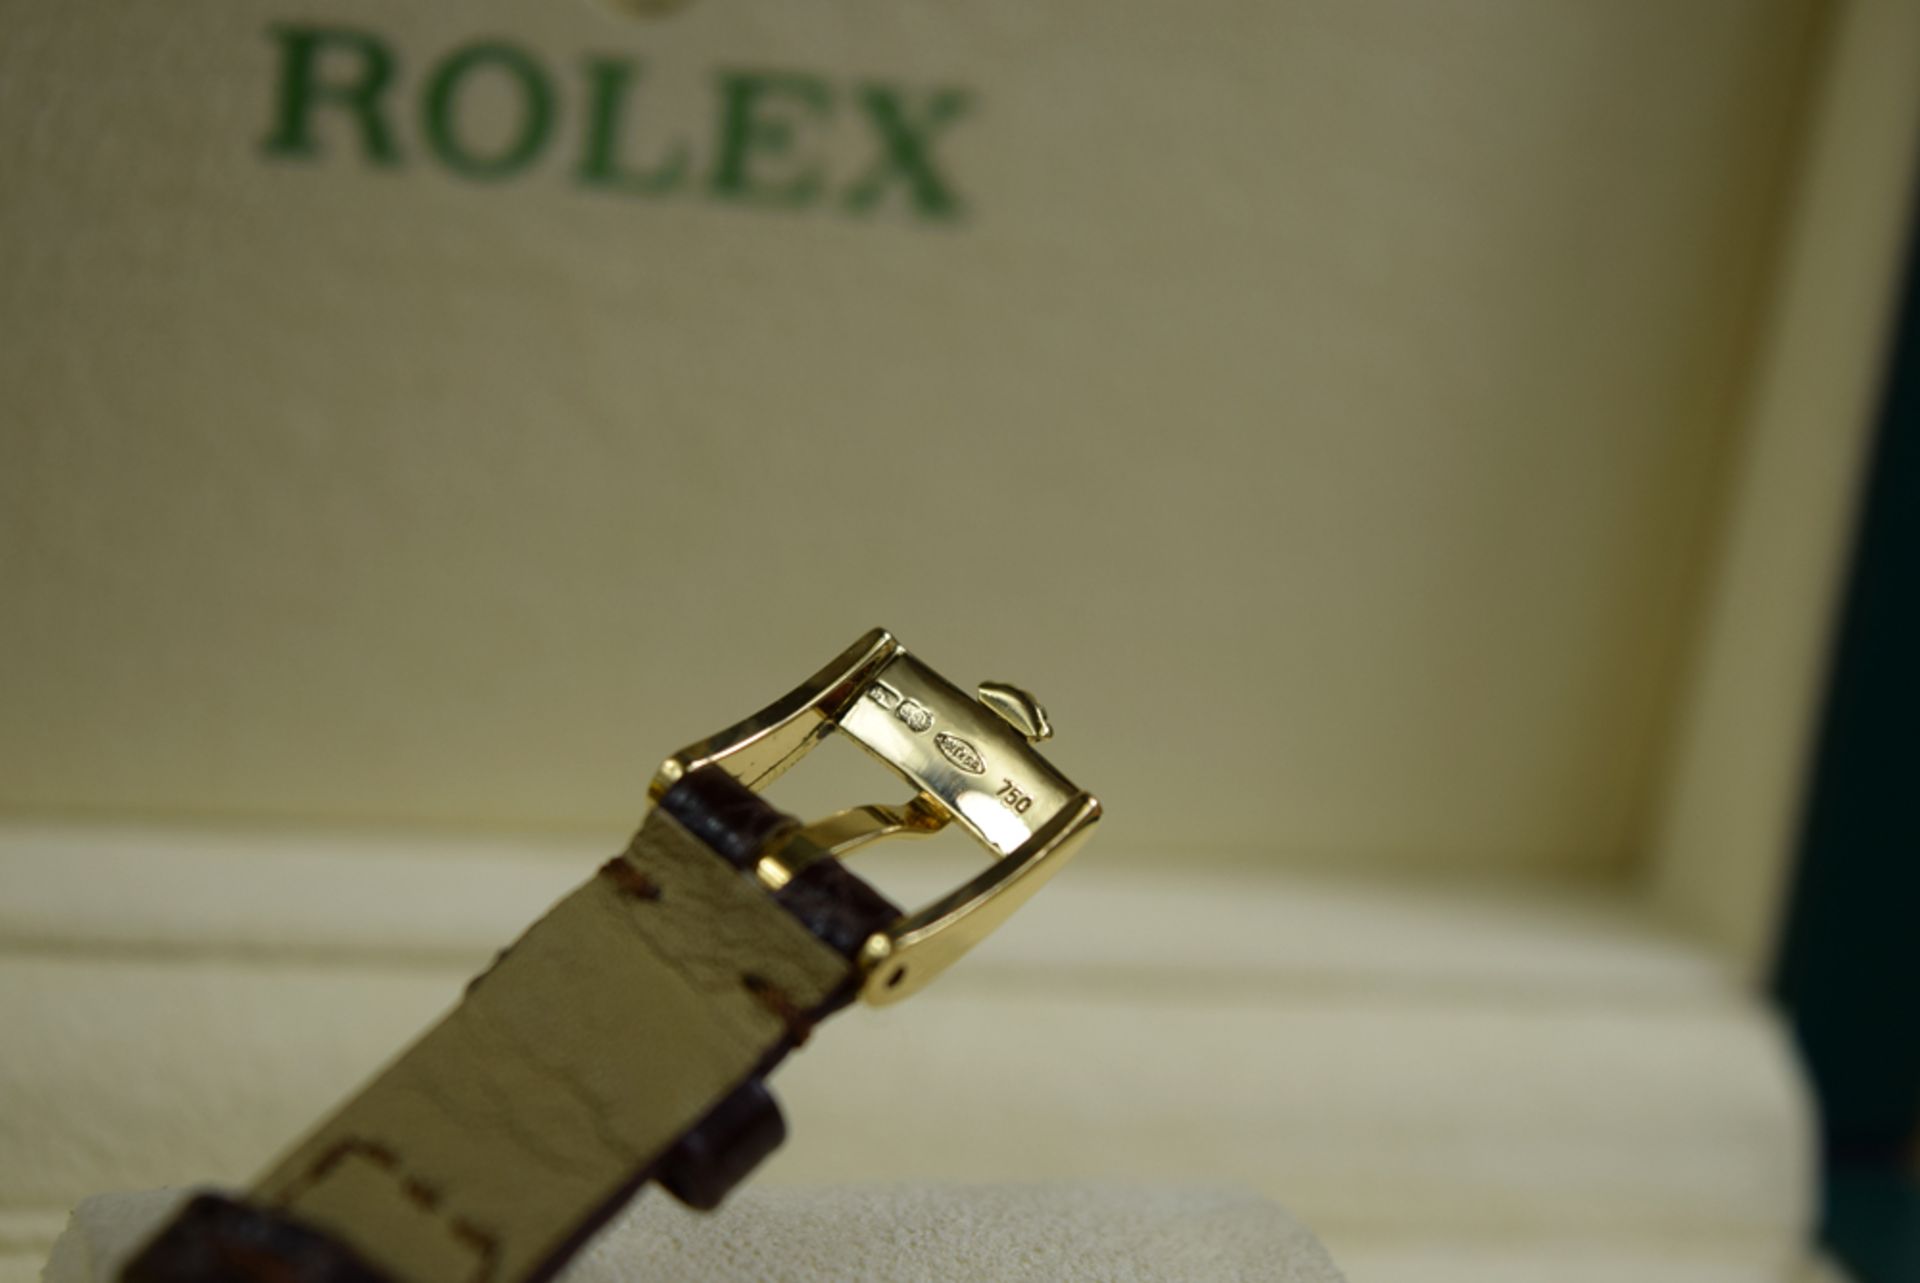 ROLEX - 18K GOLD & STEEL LADY DATEJUST - MOP *DIAMOND* DIAL! - Image 7 of 9